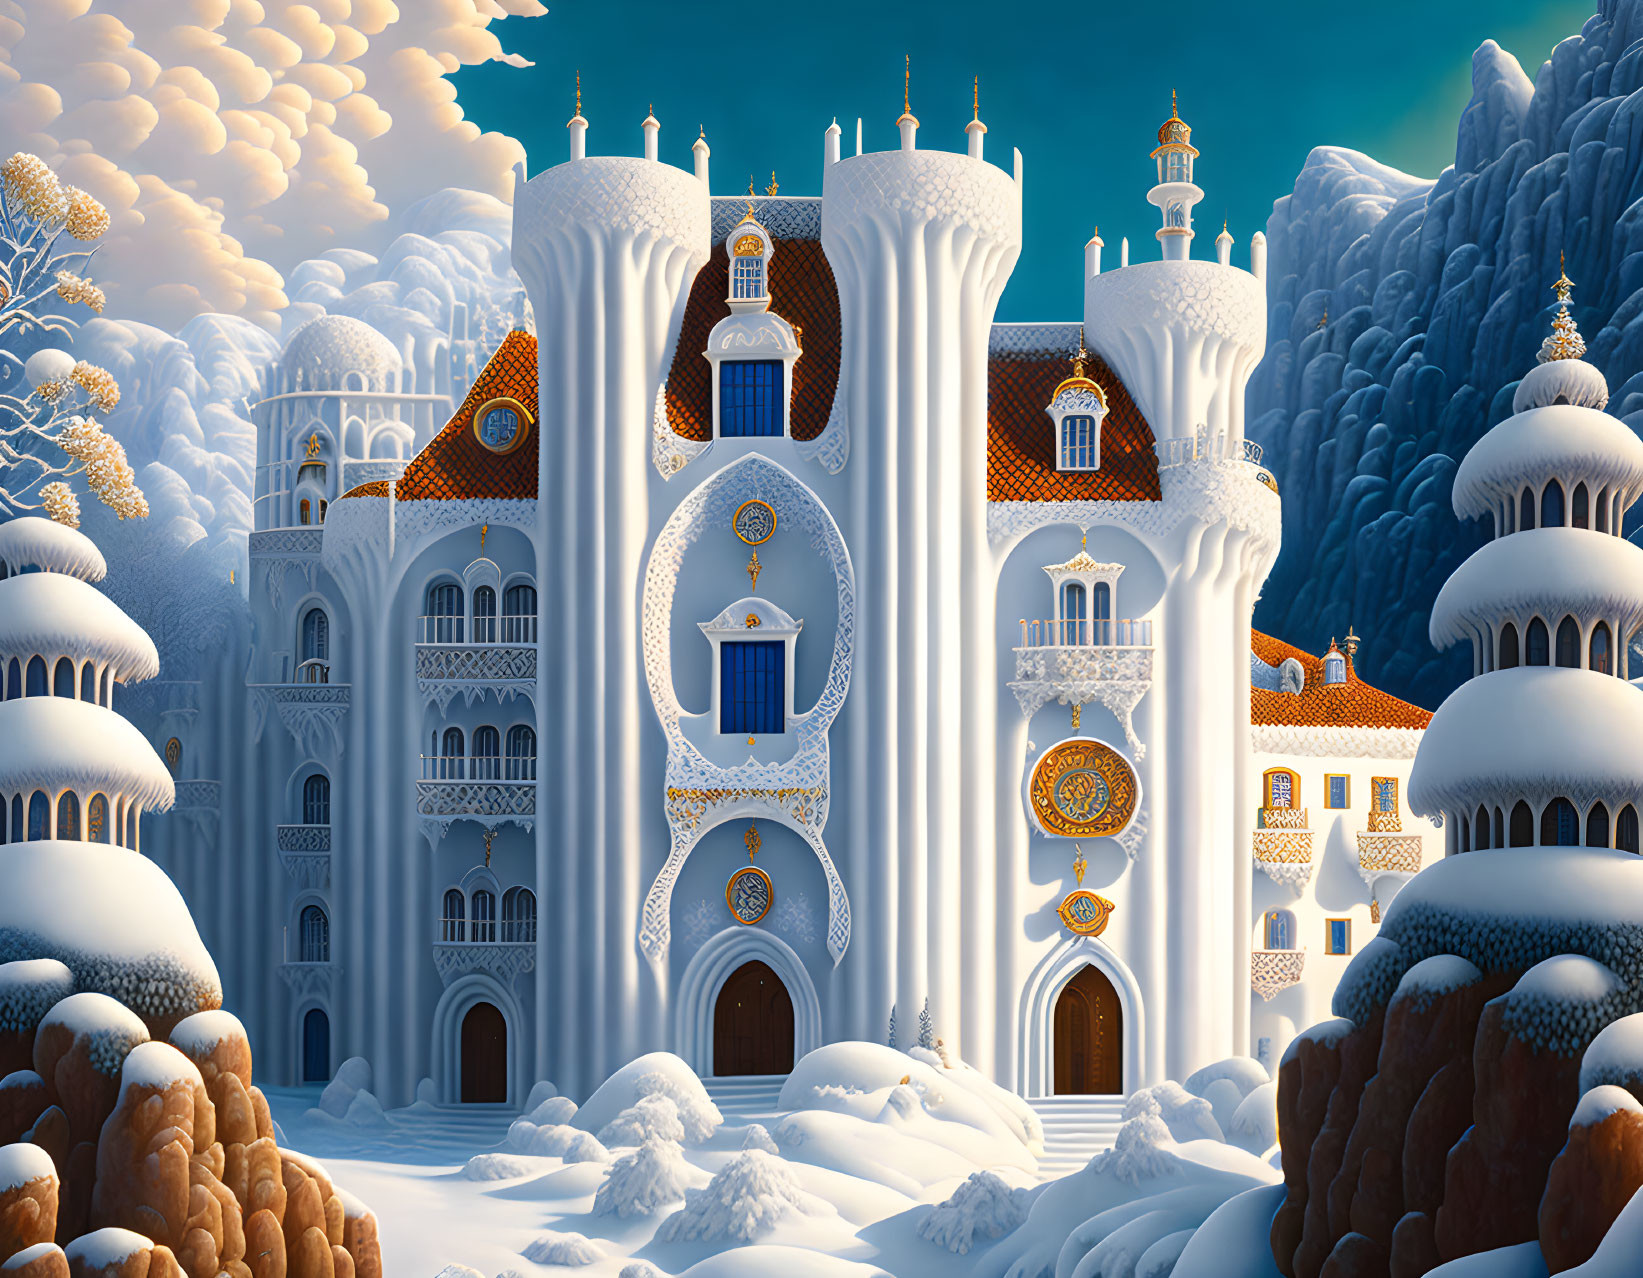 Ornate white and gold castle against snowy landscape